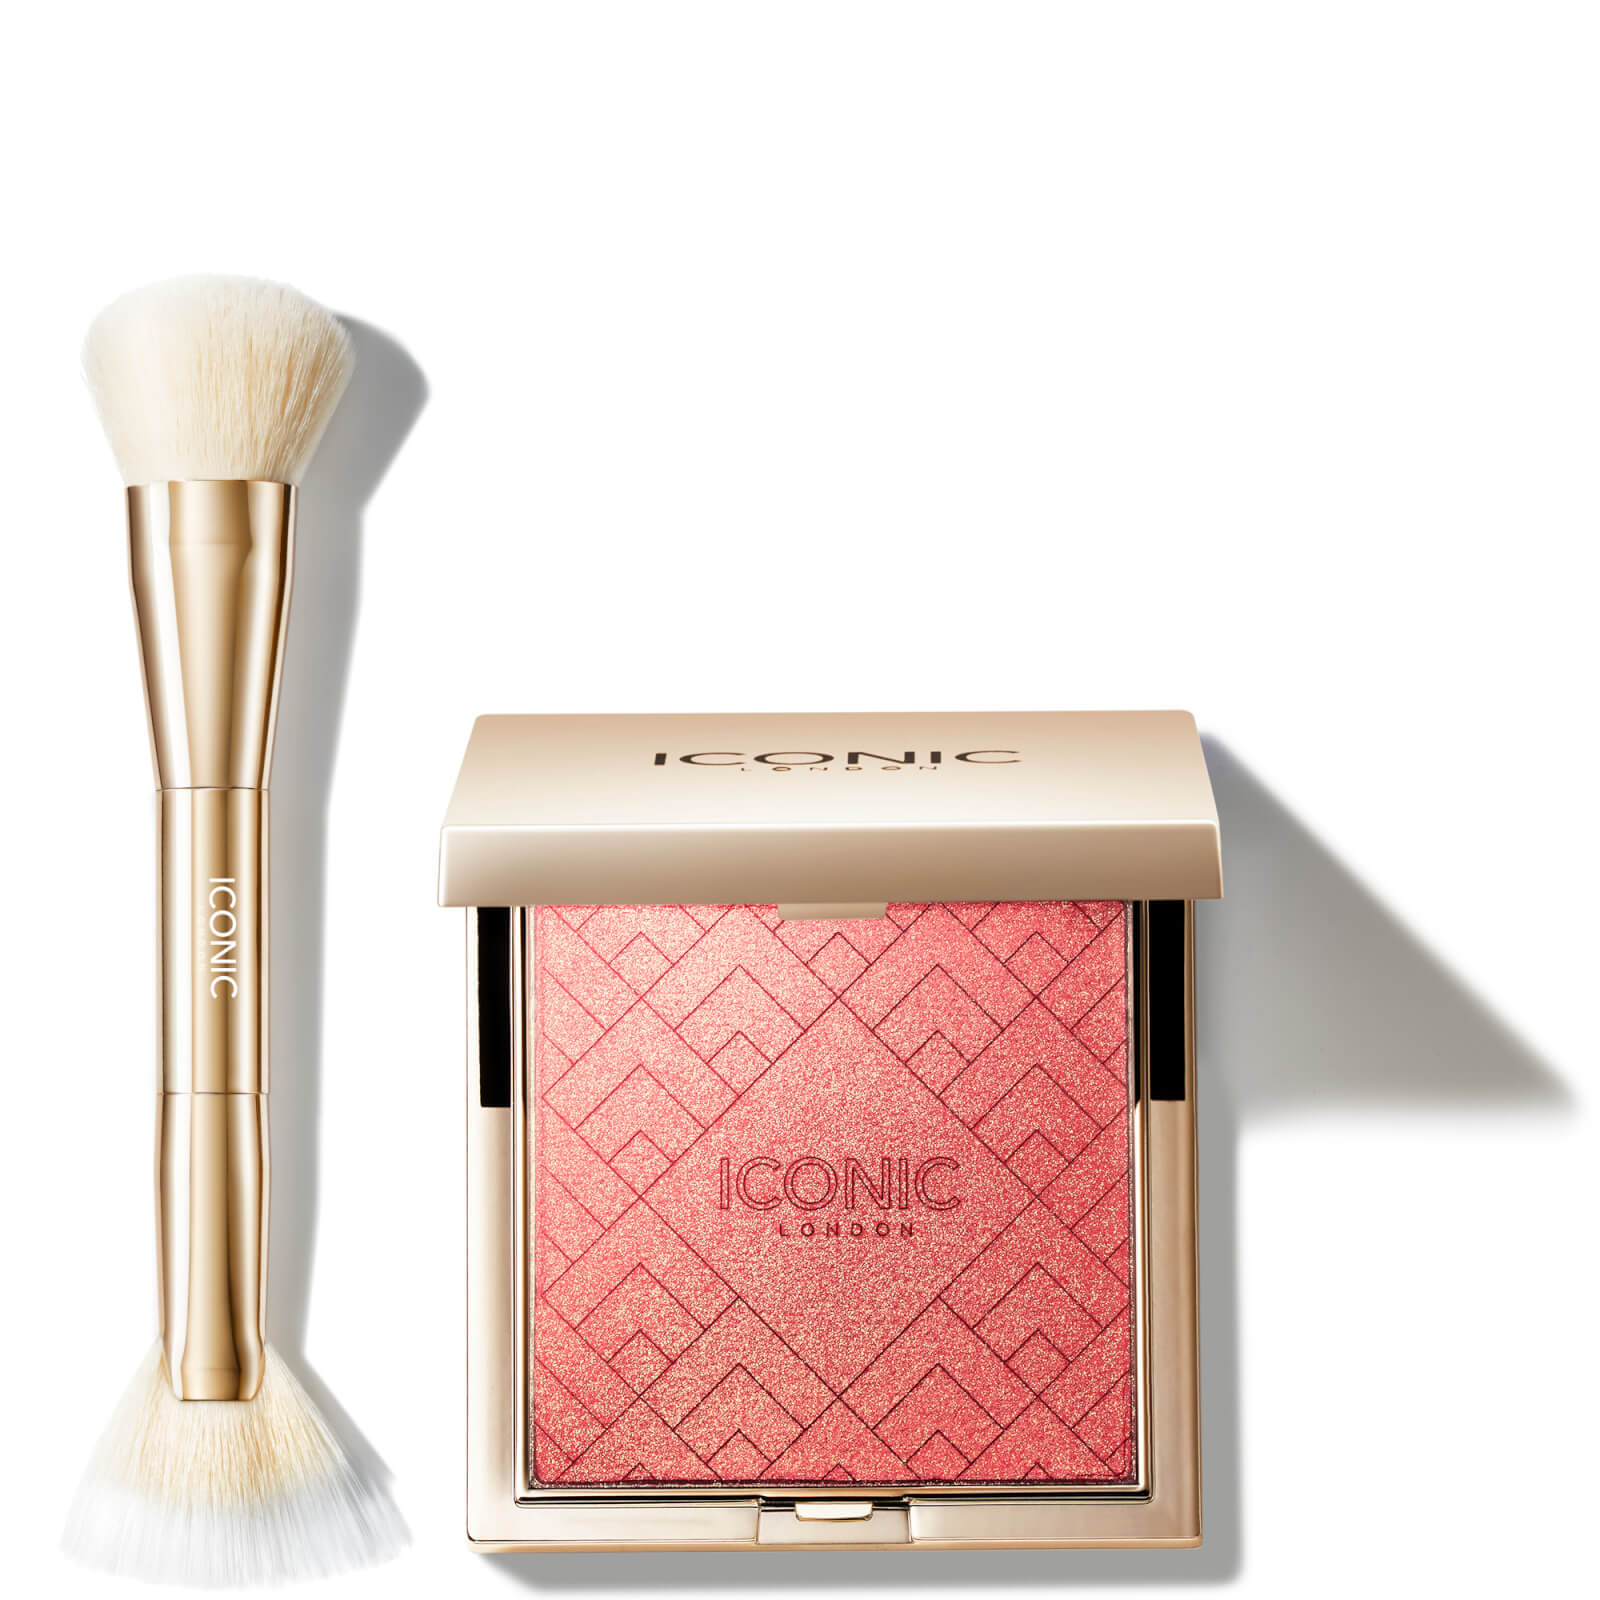 Iconic London Kissed By The Sun Multi-use Cheek Glow And Brush (various Shades) - Hot Stuff In White